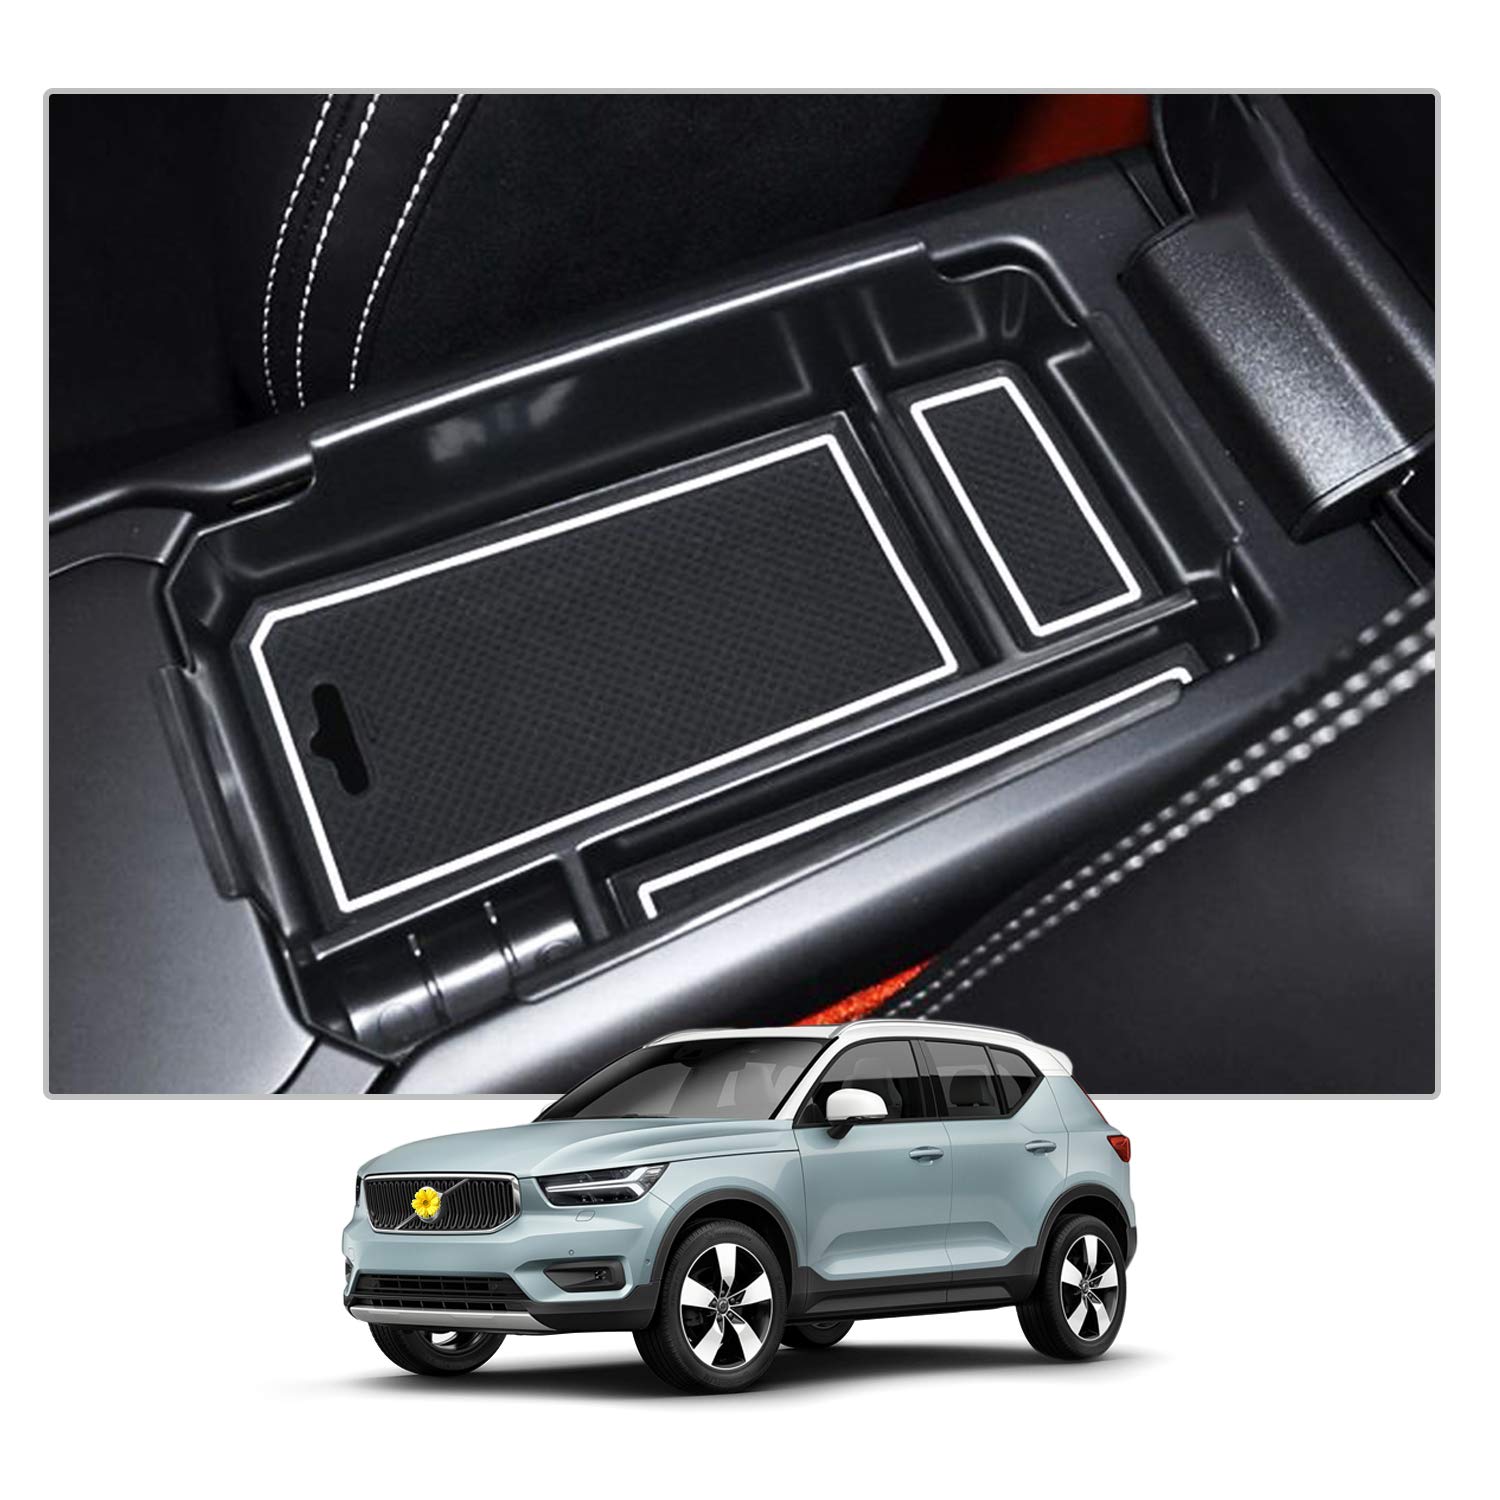 Buy LFOTPP Compatible with Volv-o XC40 XC60 XC90 V90 S90 Car